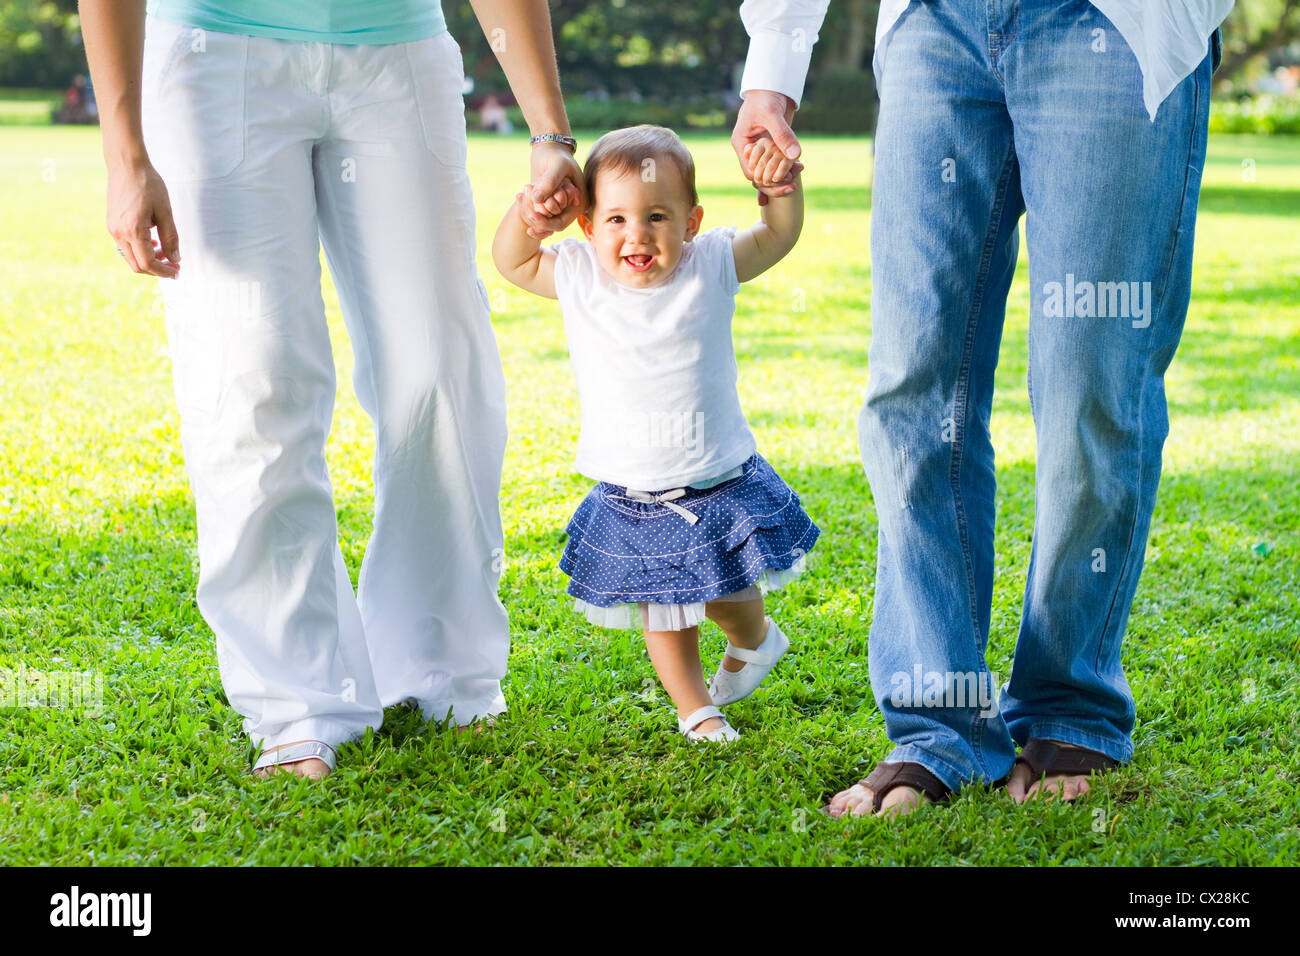 cute baby girl walking in park with parents Stock Photo - Alamy